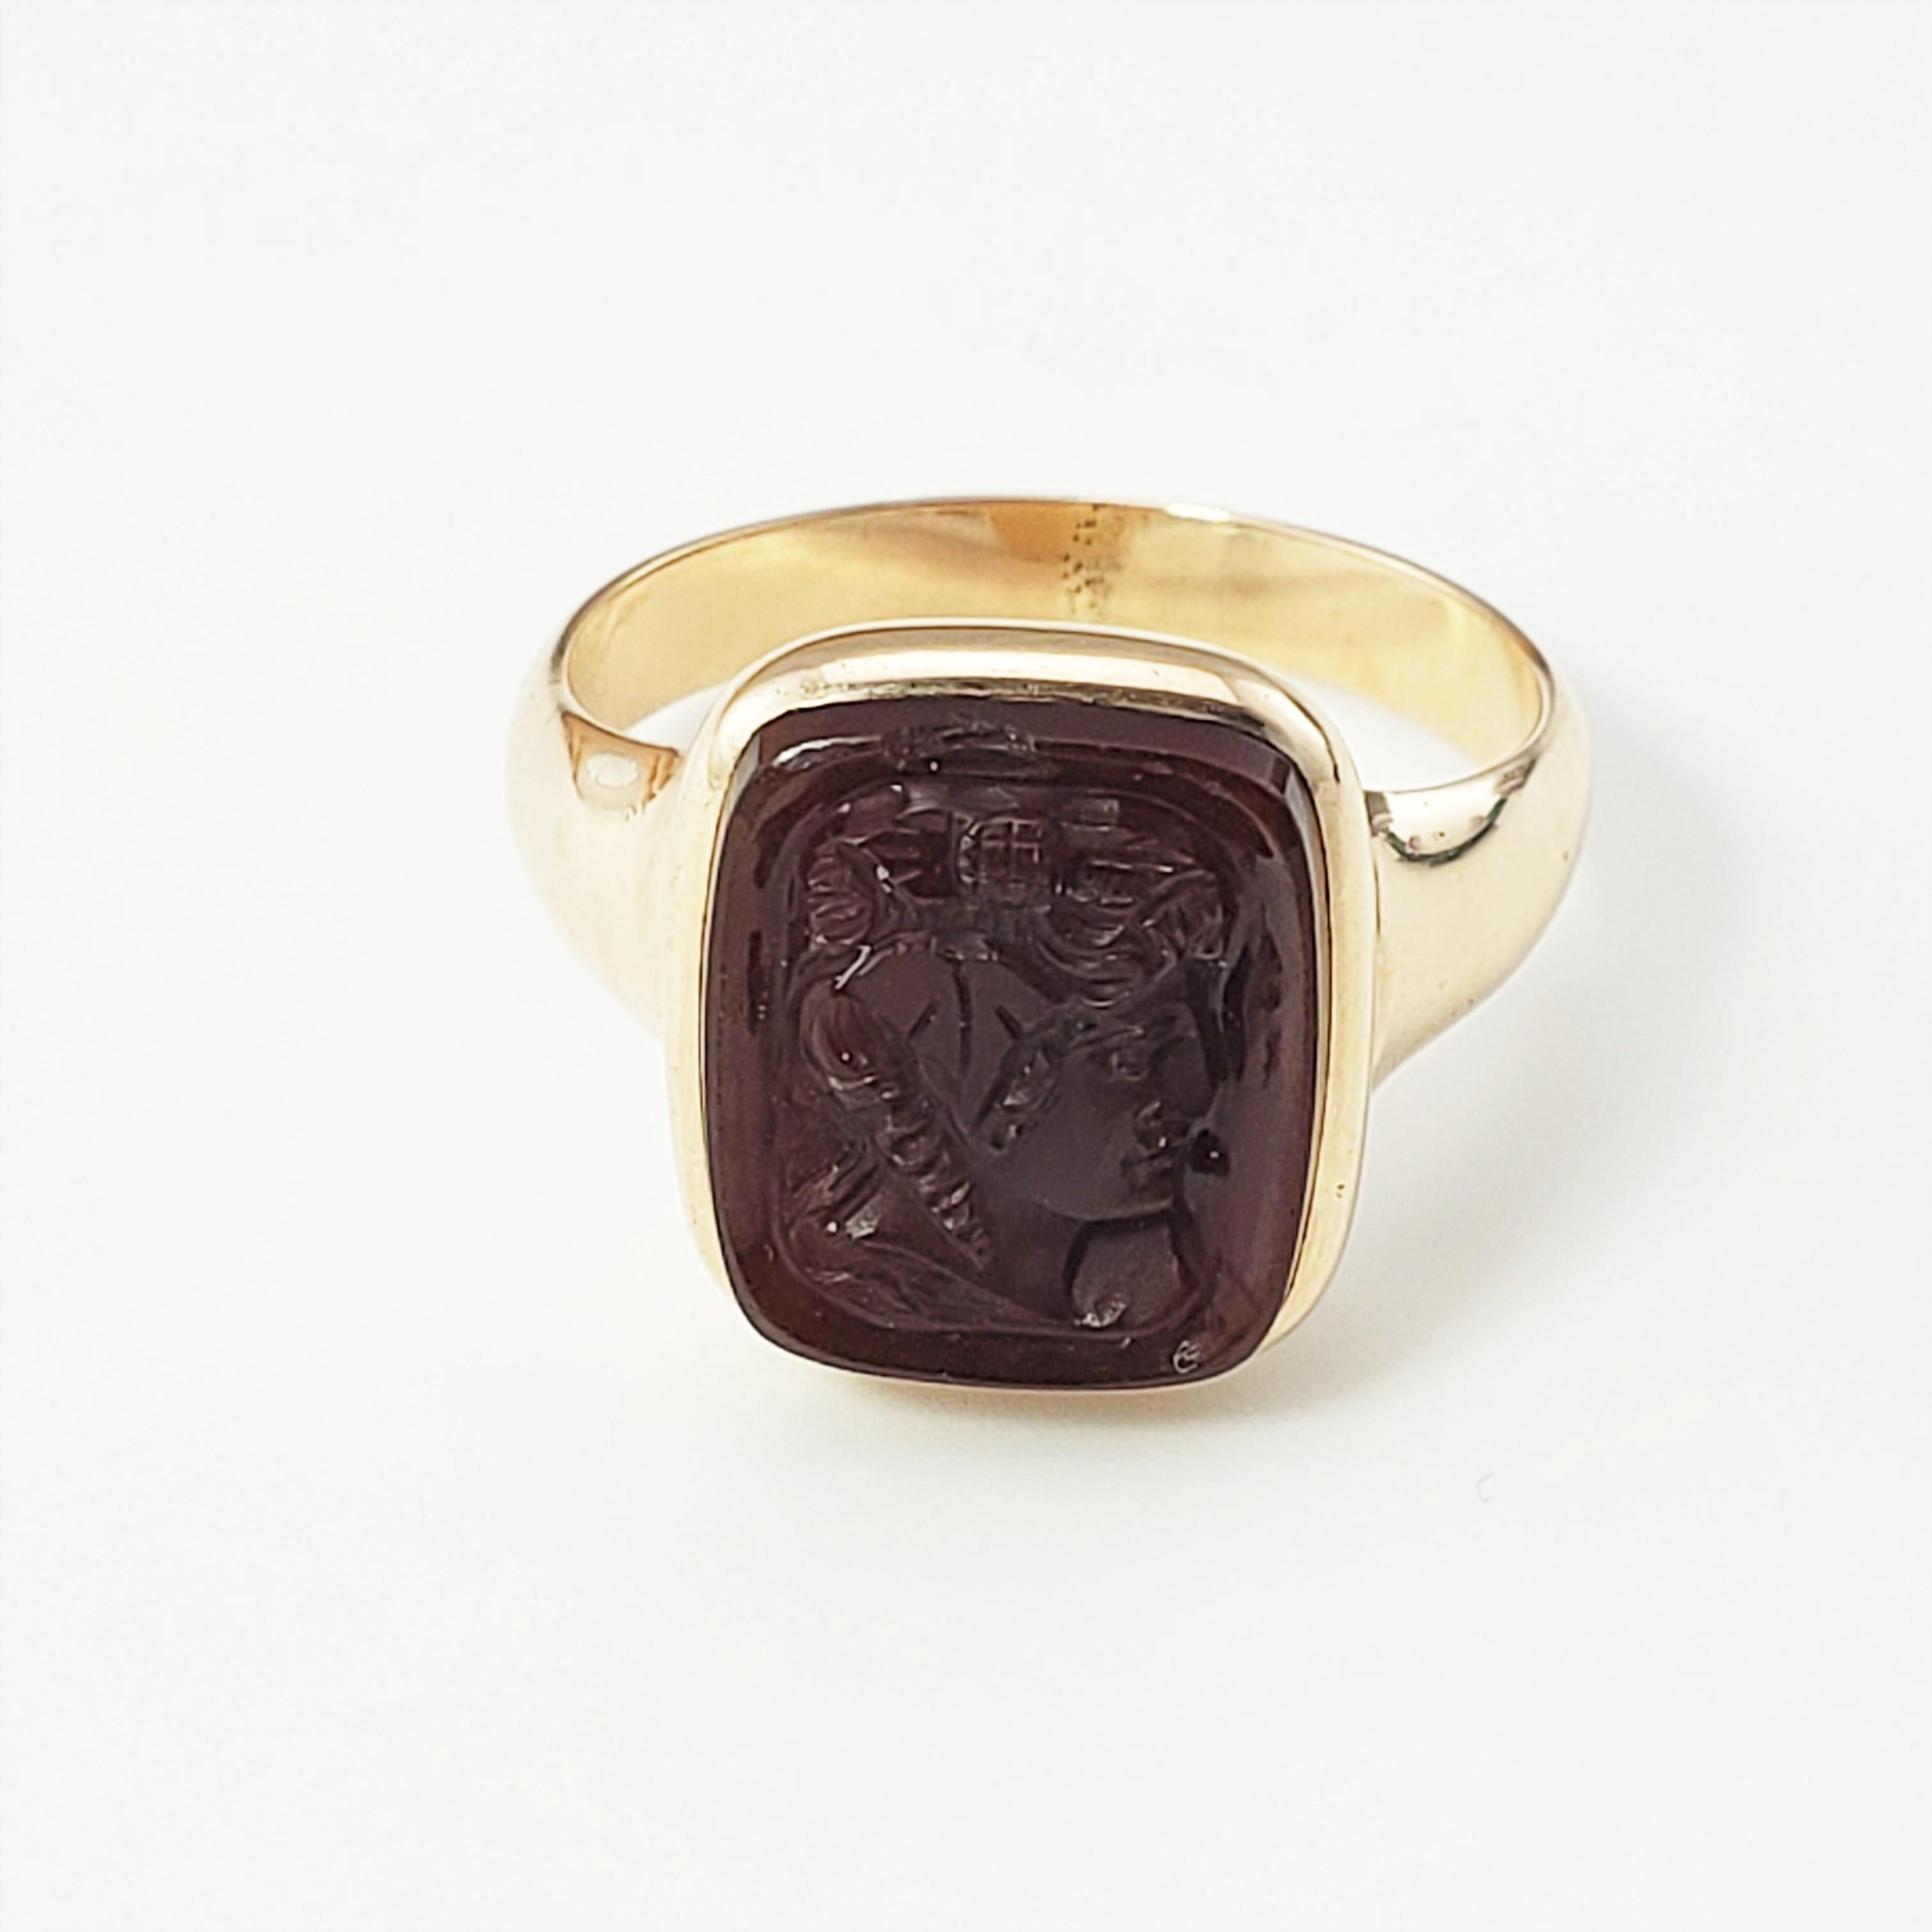 10 Karat Yellow Gold Carved Carnelian Ring Size 6-

This elegant ring features a carved carnelian stone  set in classic 10K yellow gold.  Top of ring measures 12 mm x 11 mm.  Shank: 3 mm.

Size:  6

Weight:  2.3 dwt. /  3.7 gr.

Stamped: 10K

Very